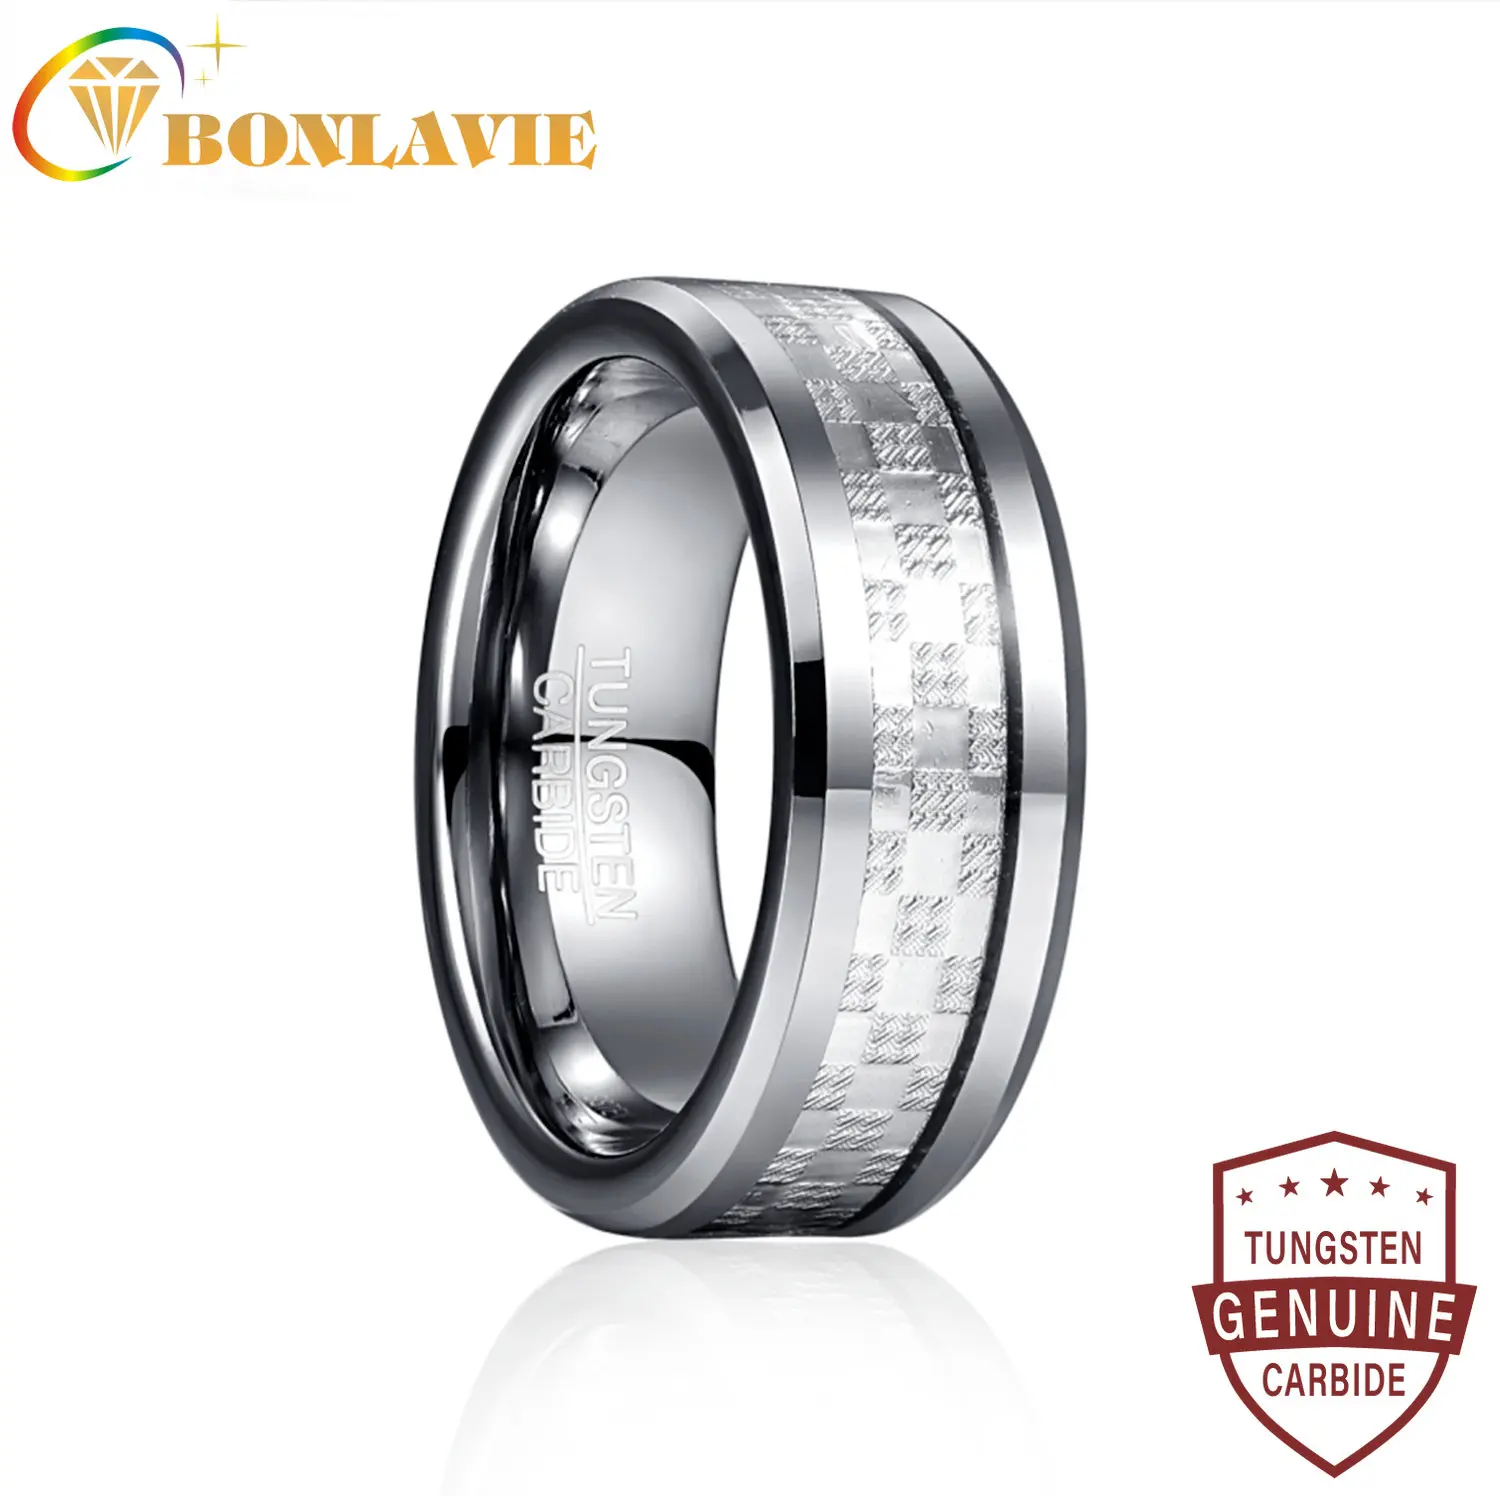 

BONLAVIE 8mm Steel Color Chamfer Inlaid with Silver Checkered Metal Sheet Tungsten Carbide Ring Men's Fashion Wedding Jewelry